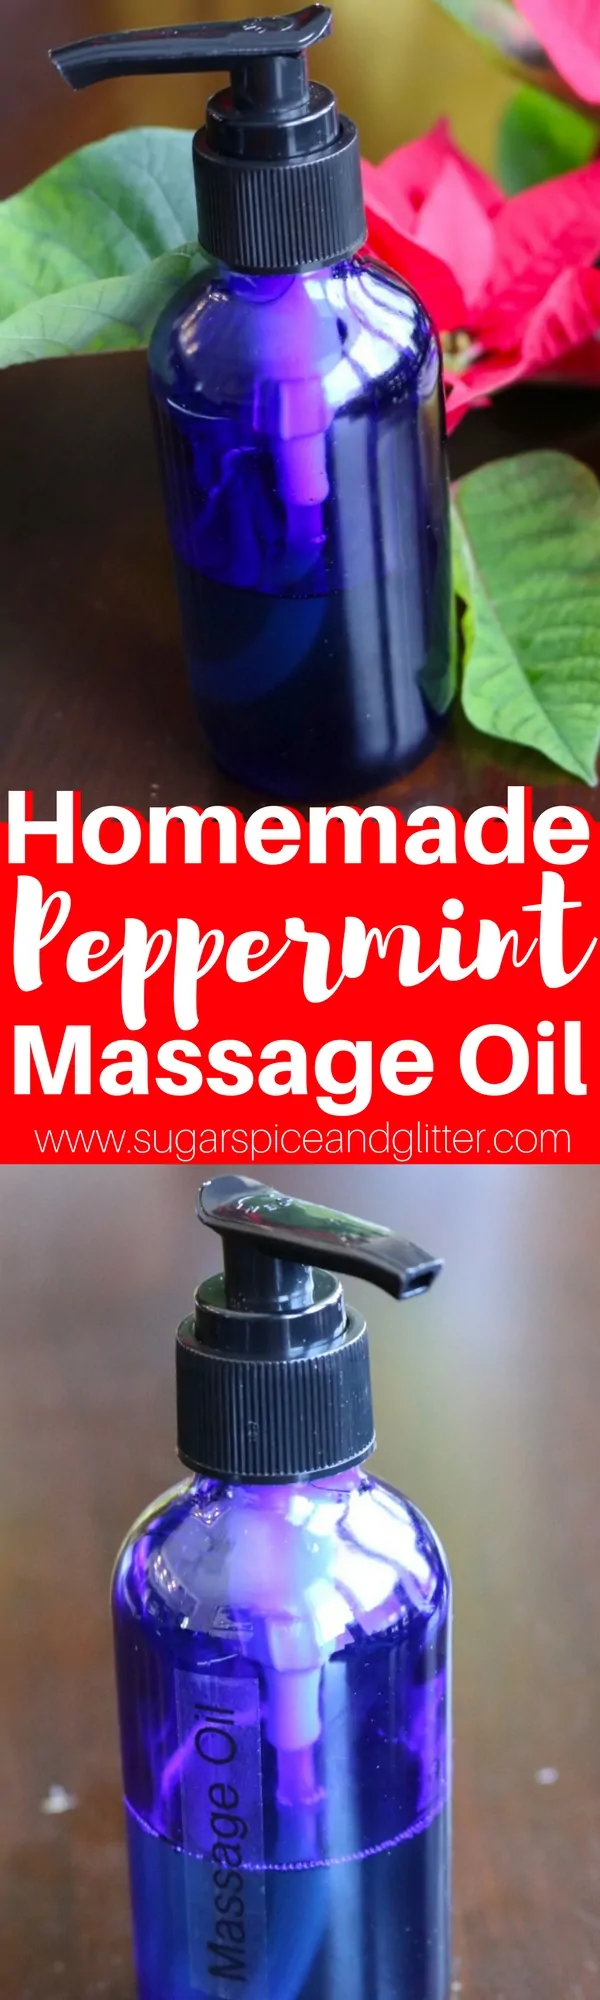 DIY Peppermint Massage Oil (with Video)